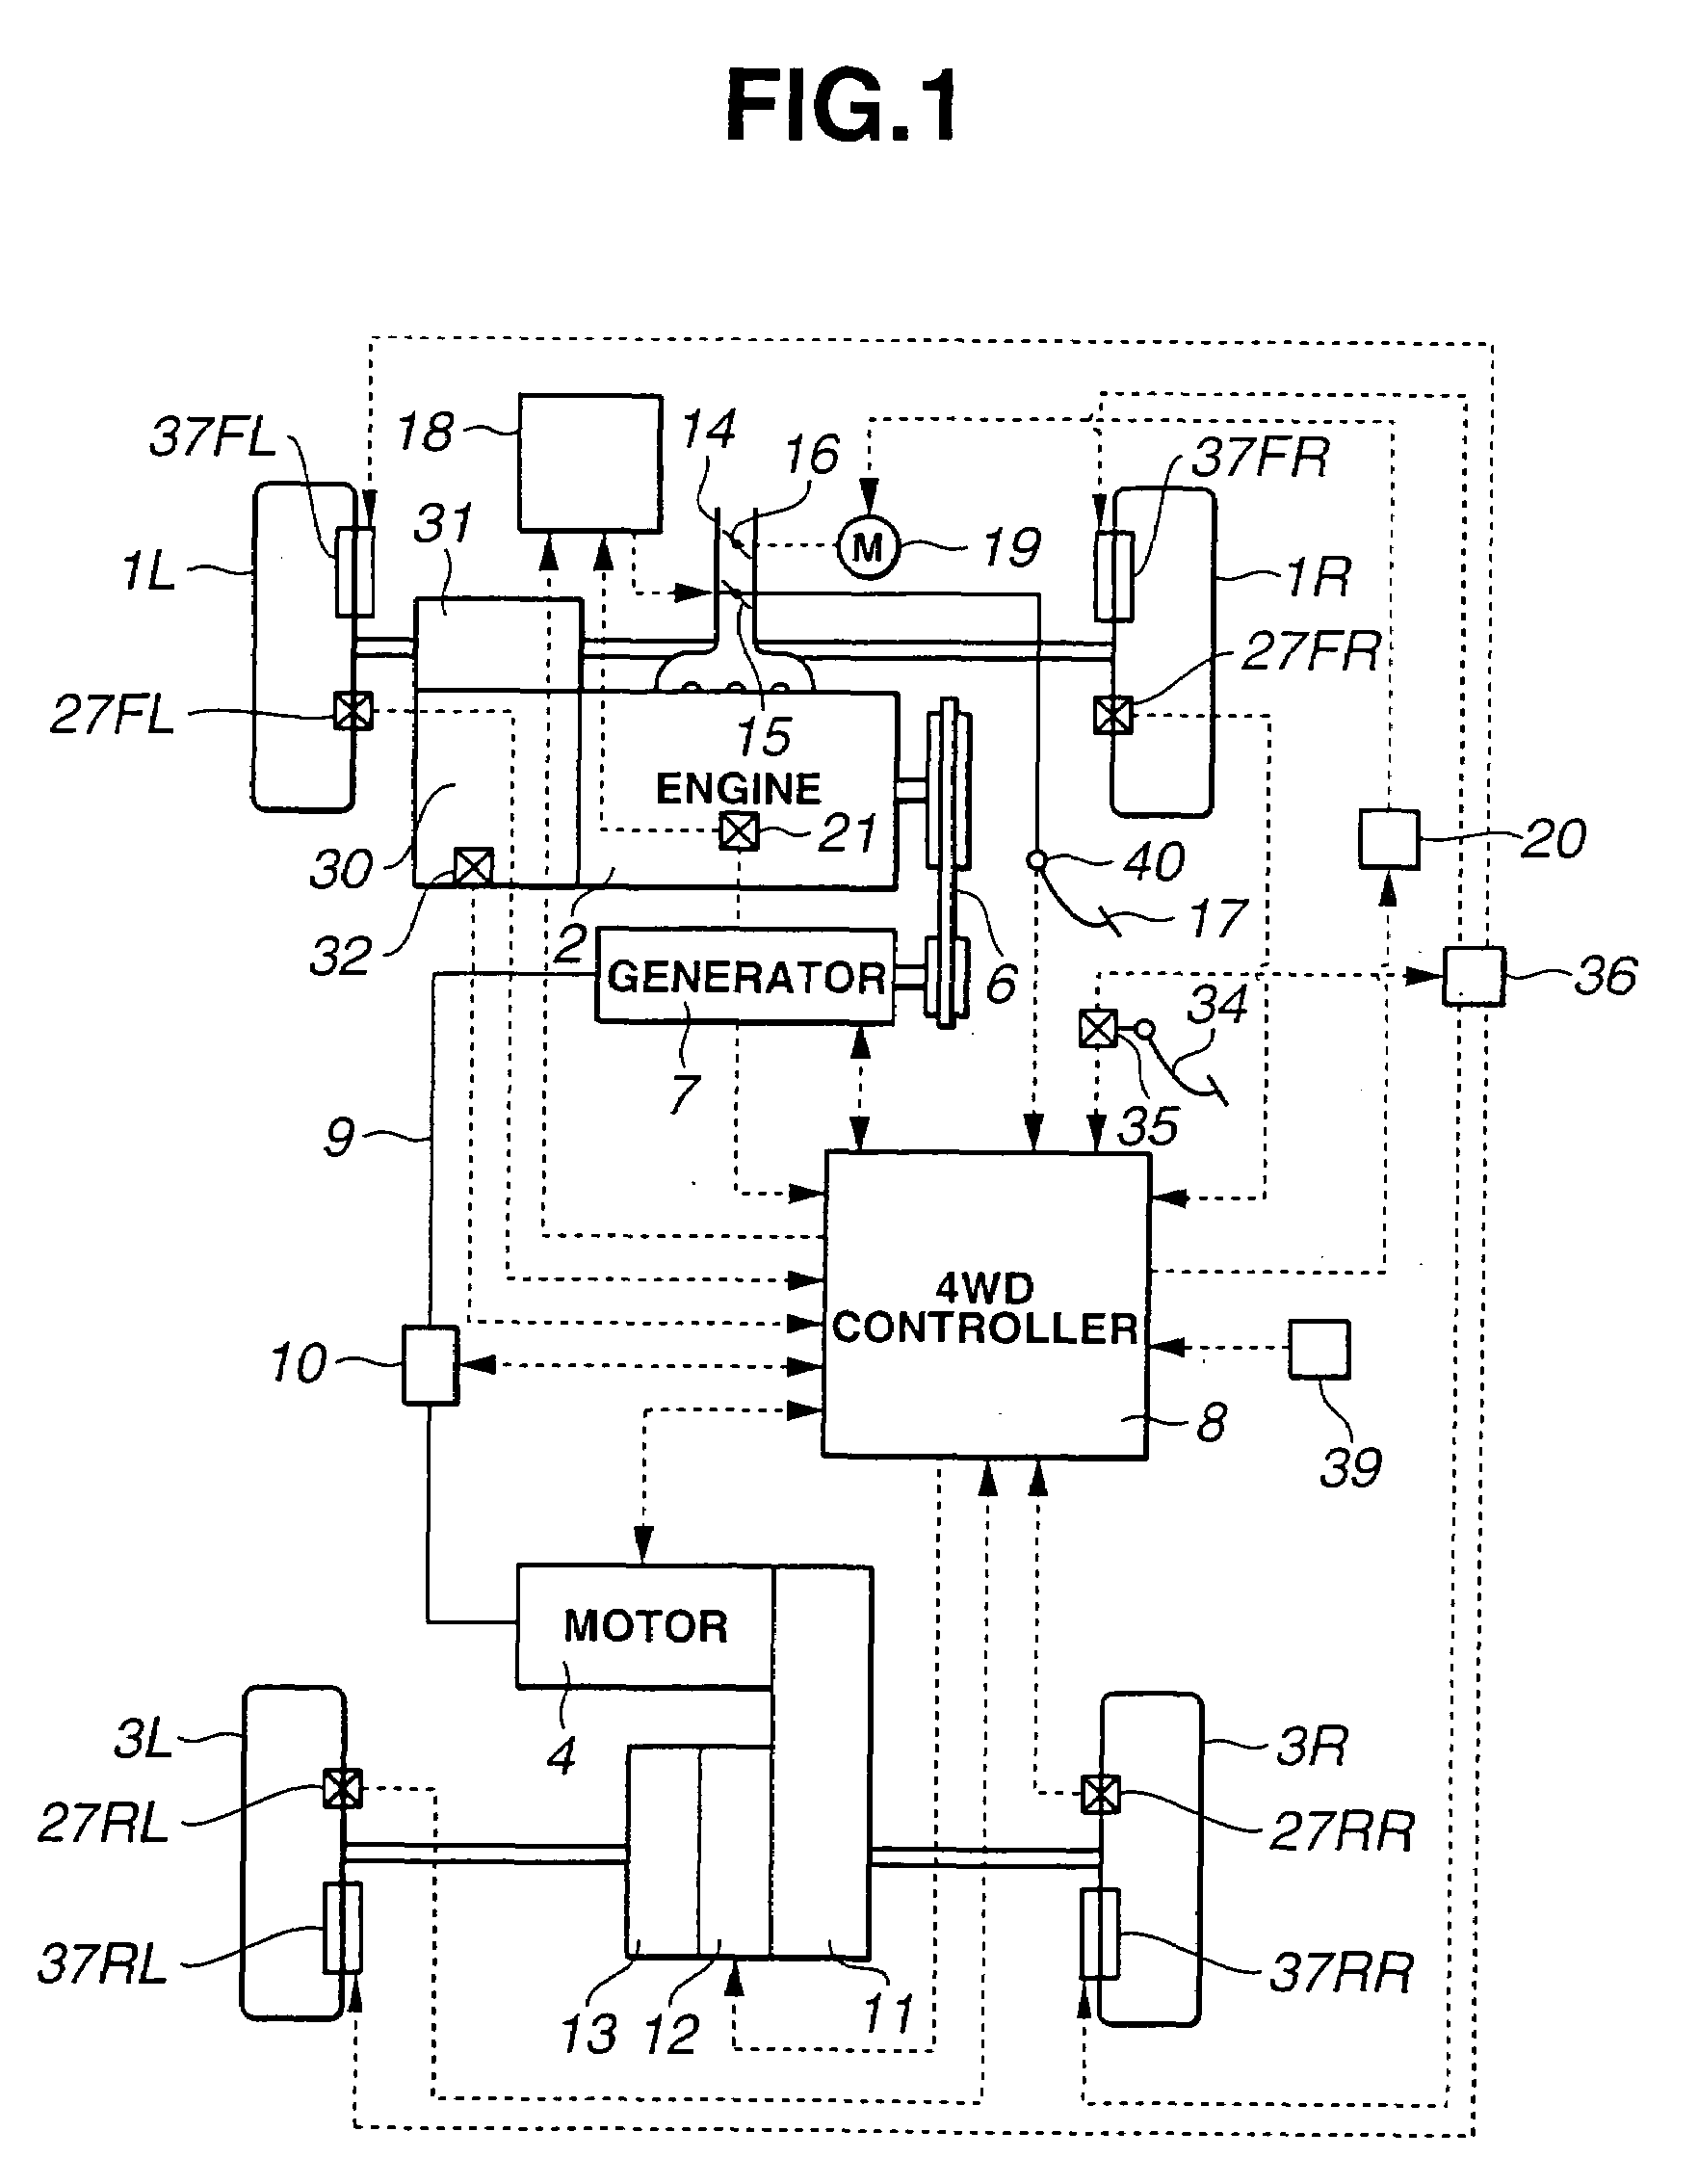 Driving force control apparatus for automotive vehicles